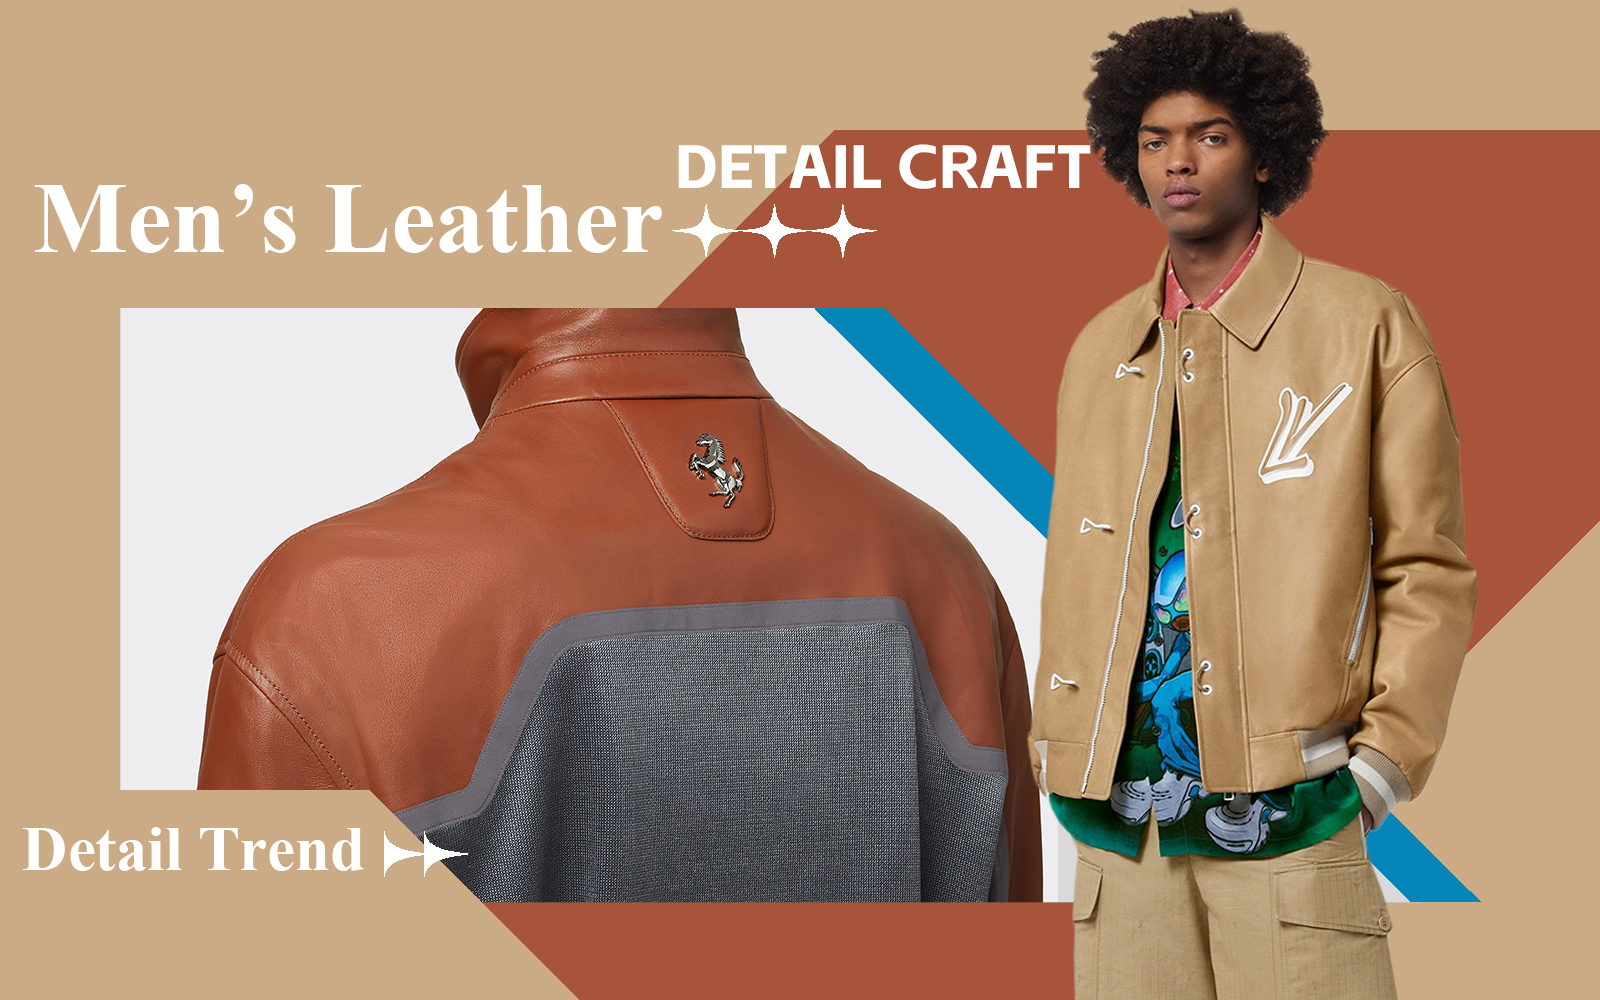 Light Business -- The Detail & Craft Trend for Men's Leather